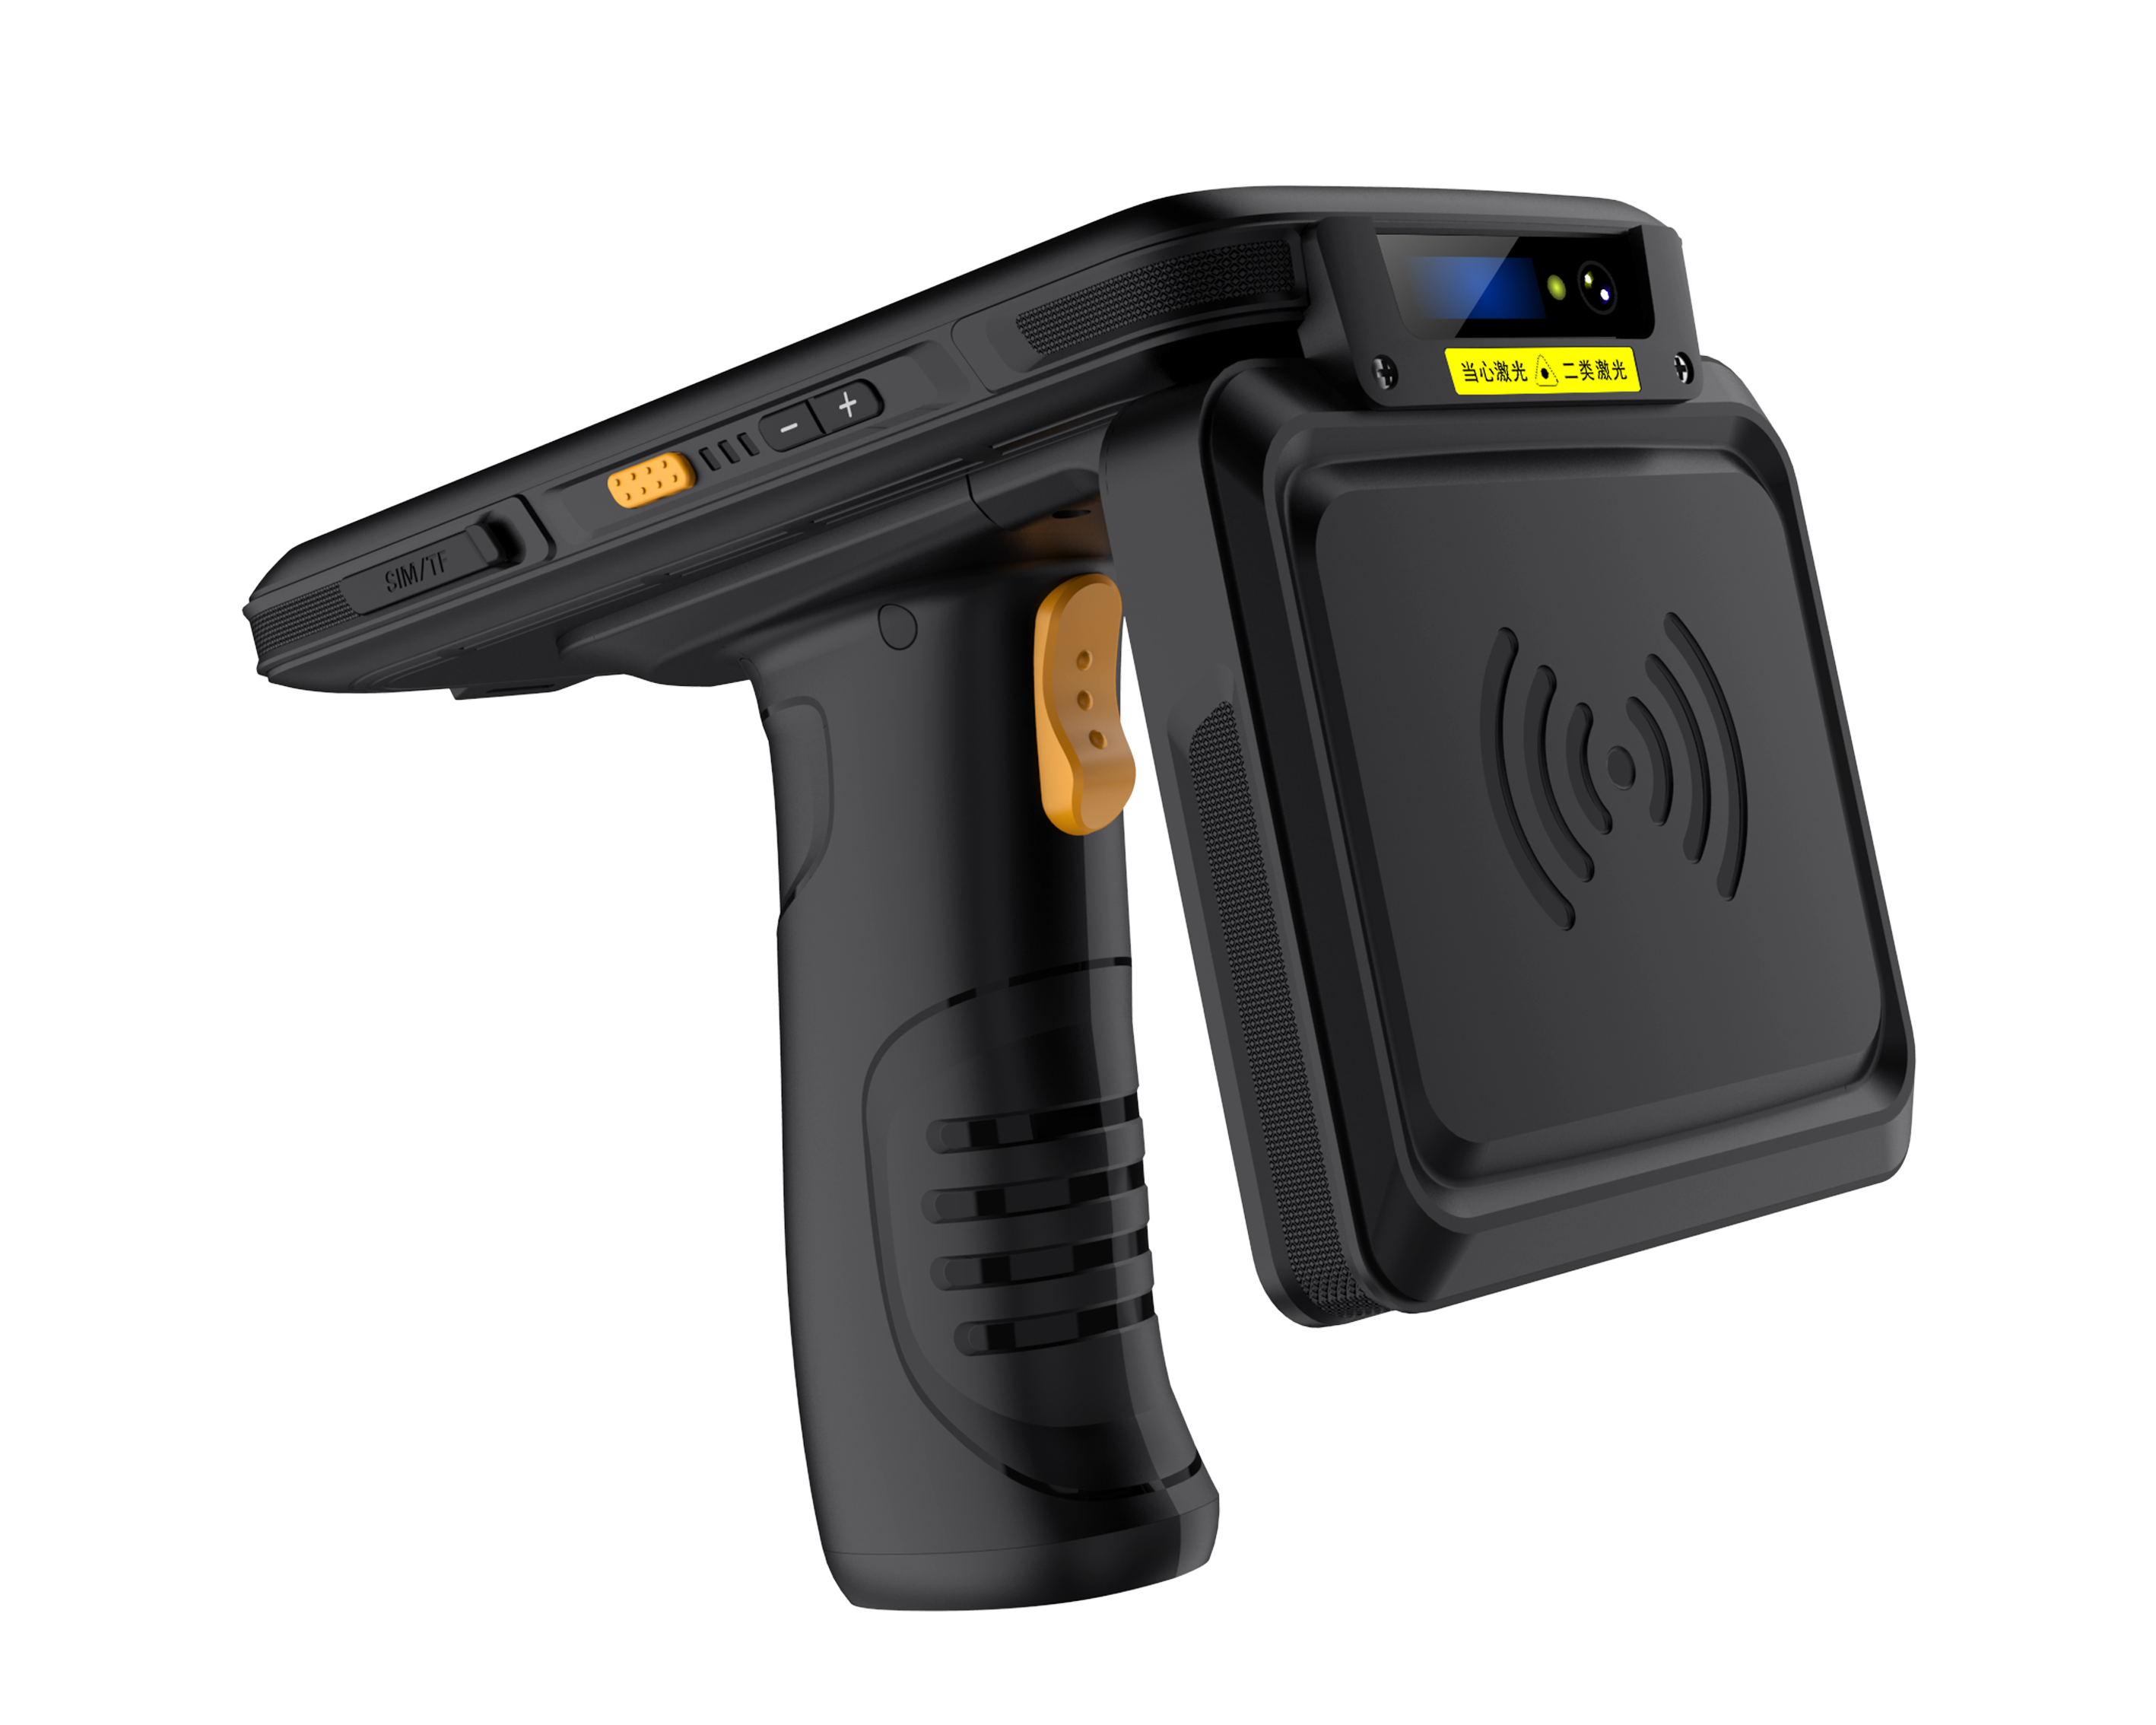 UHF Android Smart Computer PDA Barcode Scanner